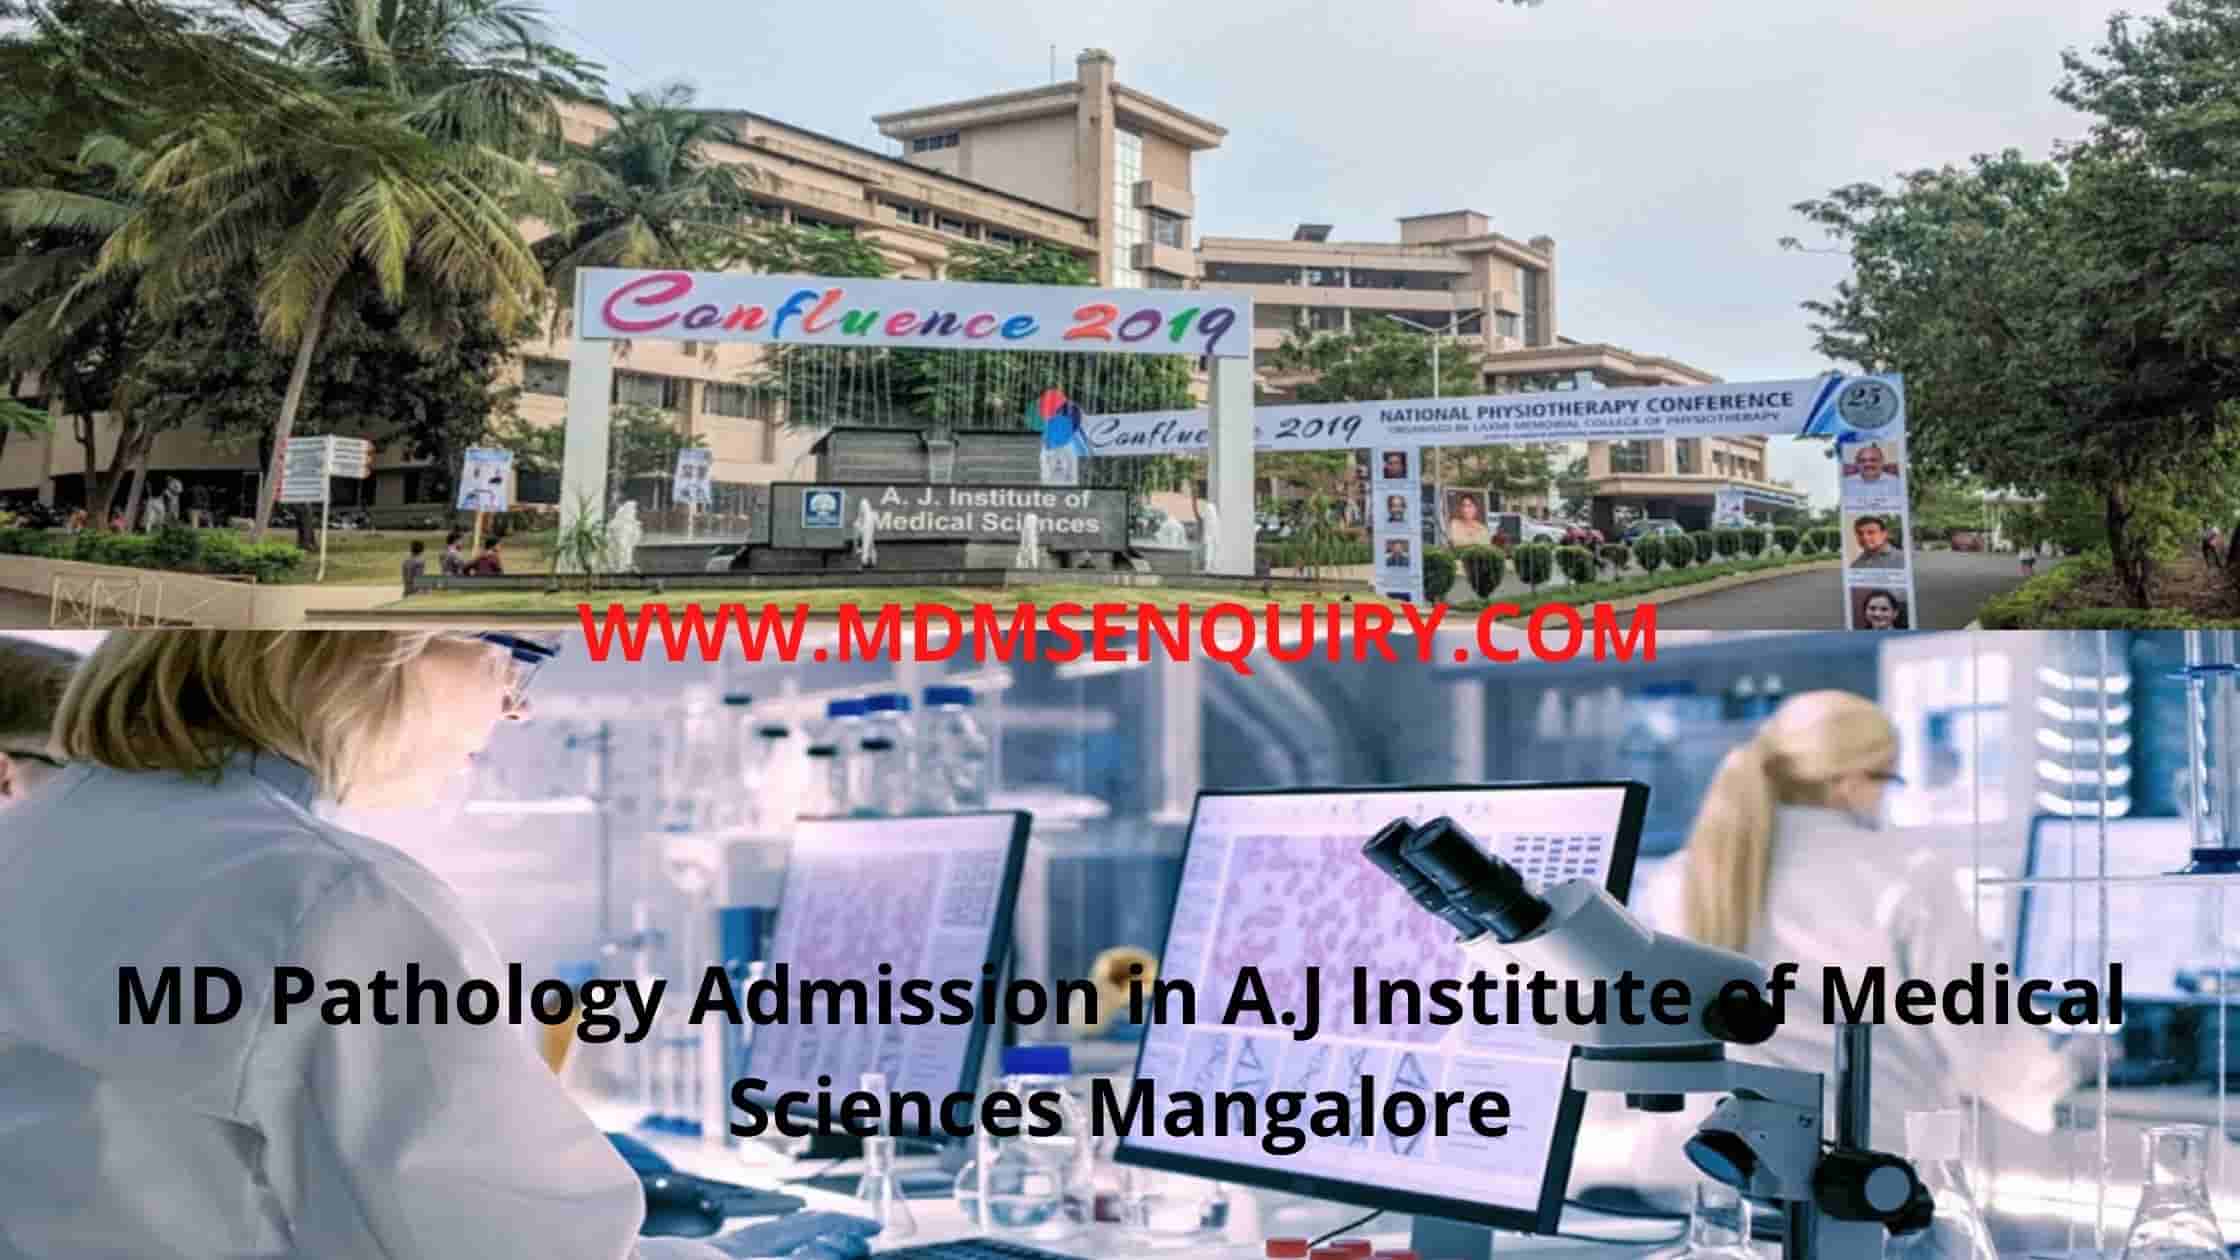 MD Pathology Admission in A.J Institute of Medical Sciences Mangalore